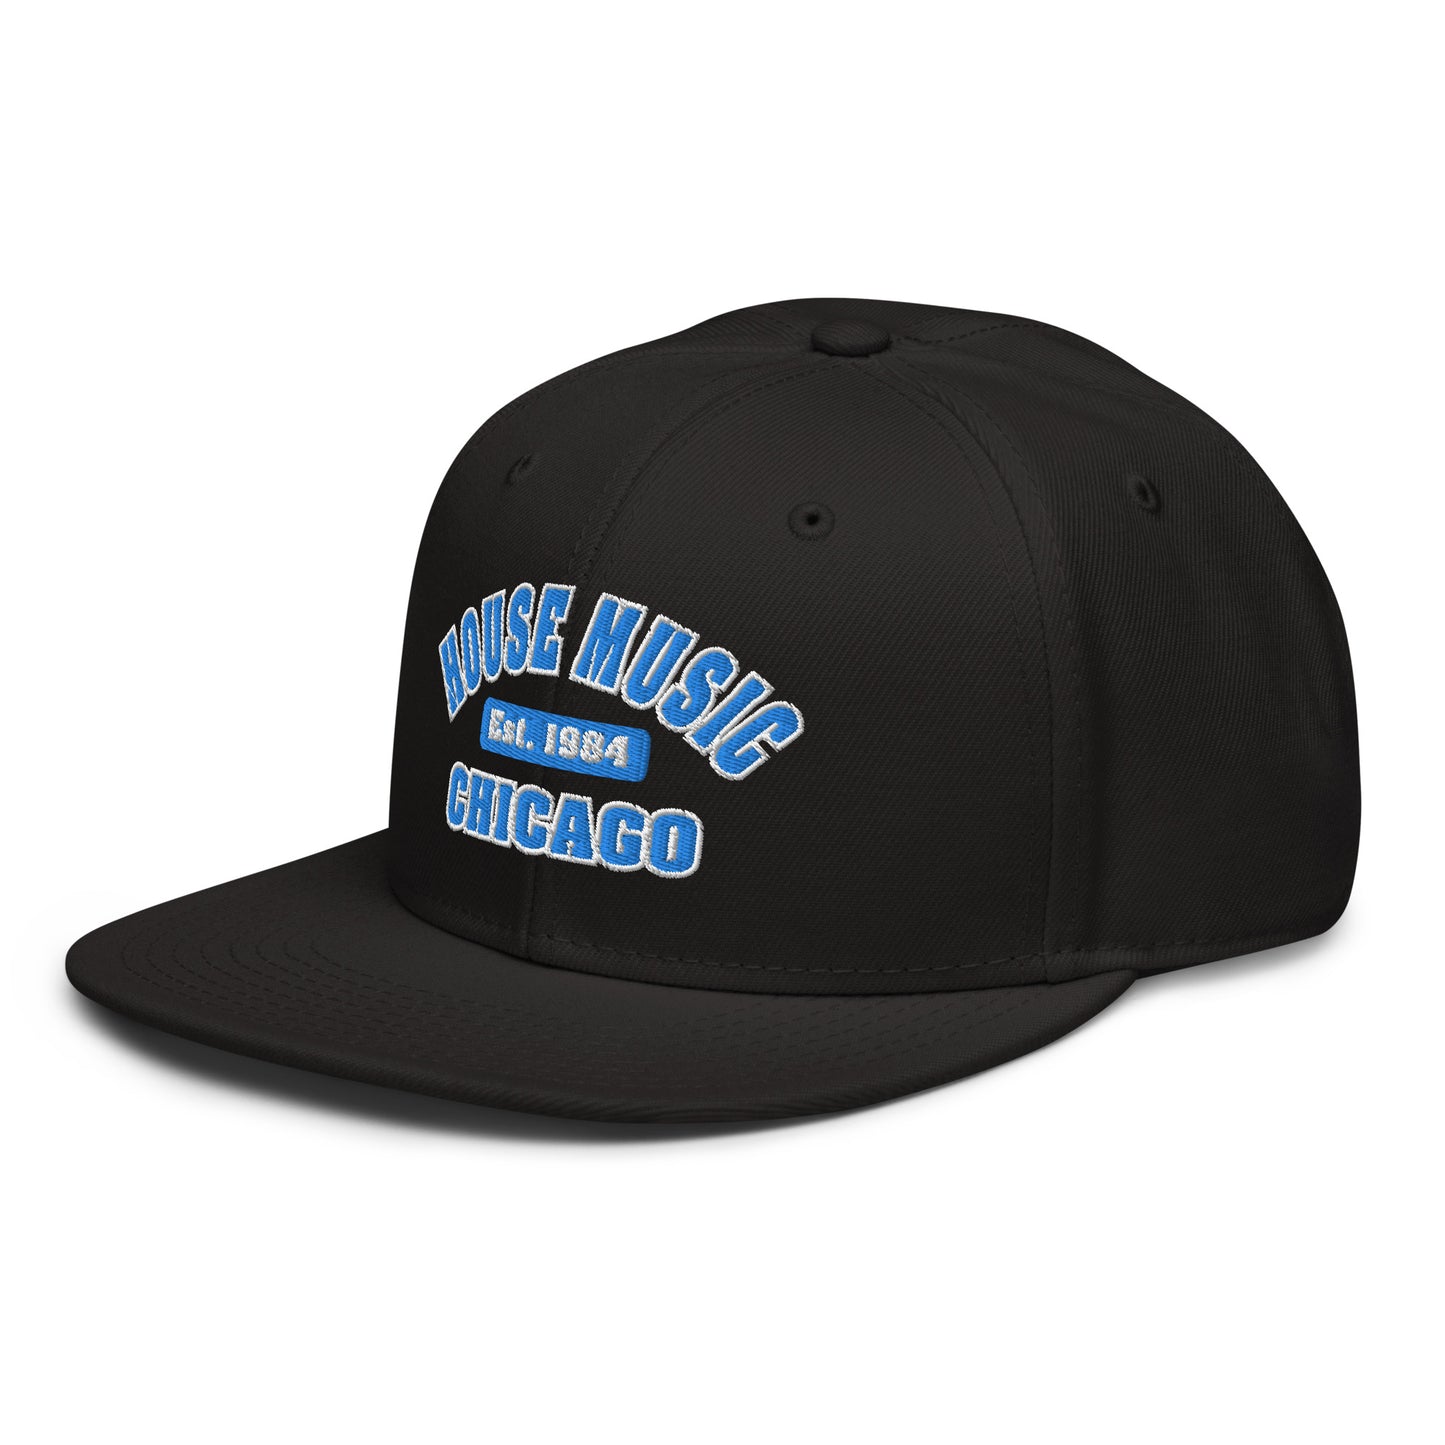 CHICAGO HOUSE | CLASSIC - BLUE EDITION | Snapback Hat